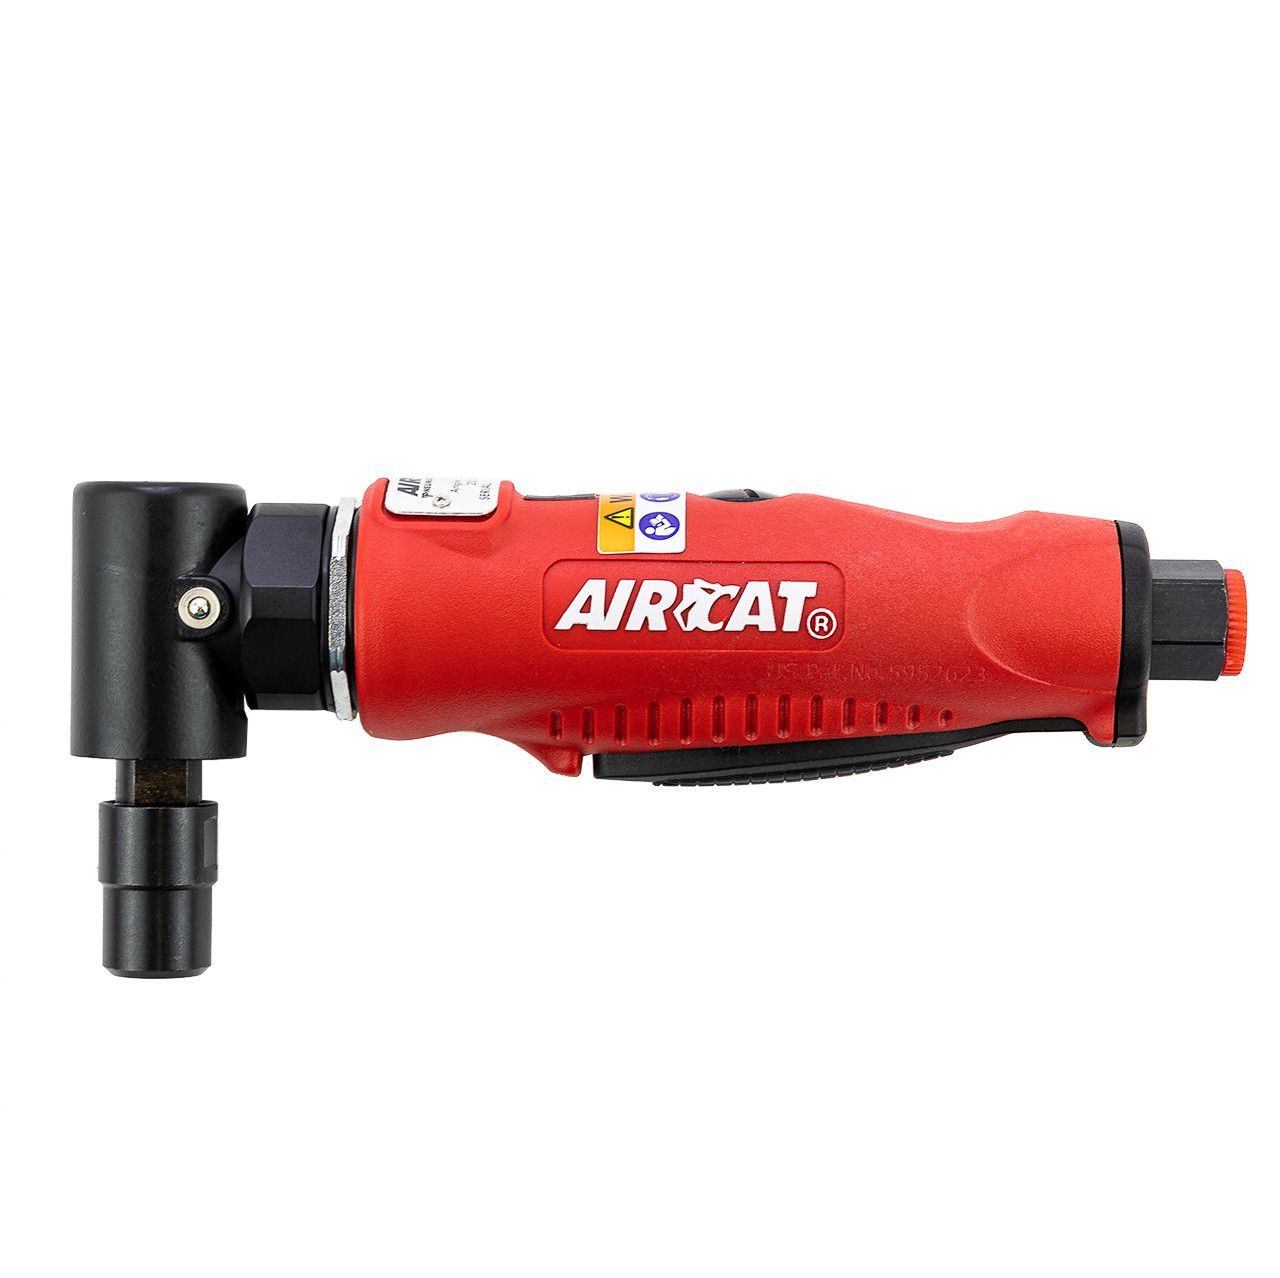 AIRCAT 6255 Professional Series Red Composite Angle Die Grinder With Angled Gear Mechanism by AirCat - 2